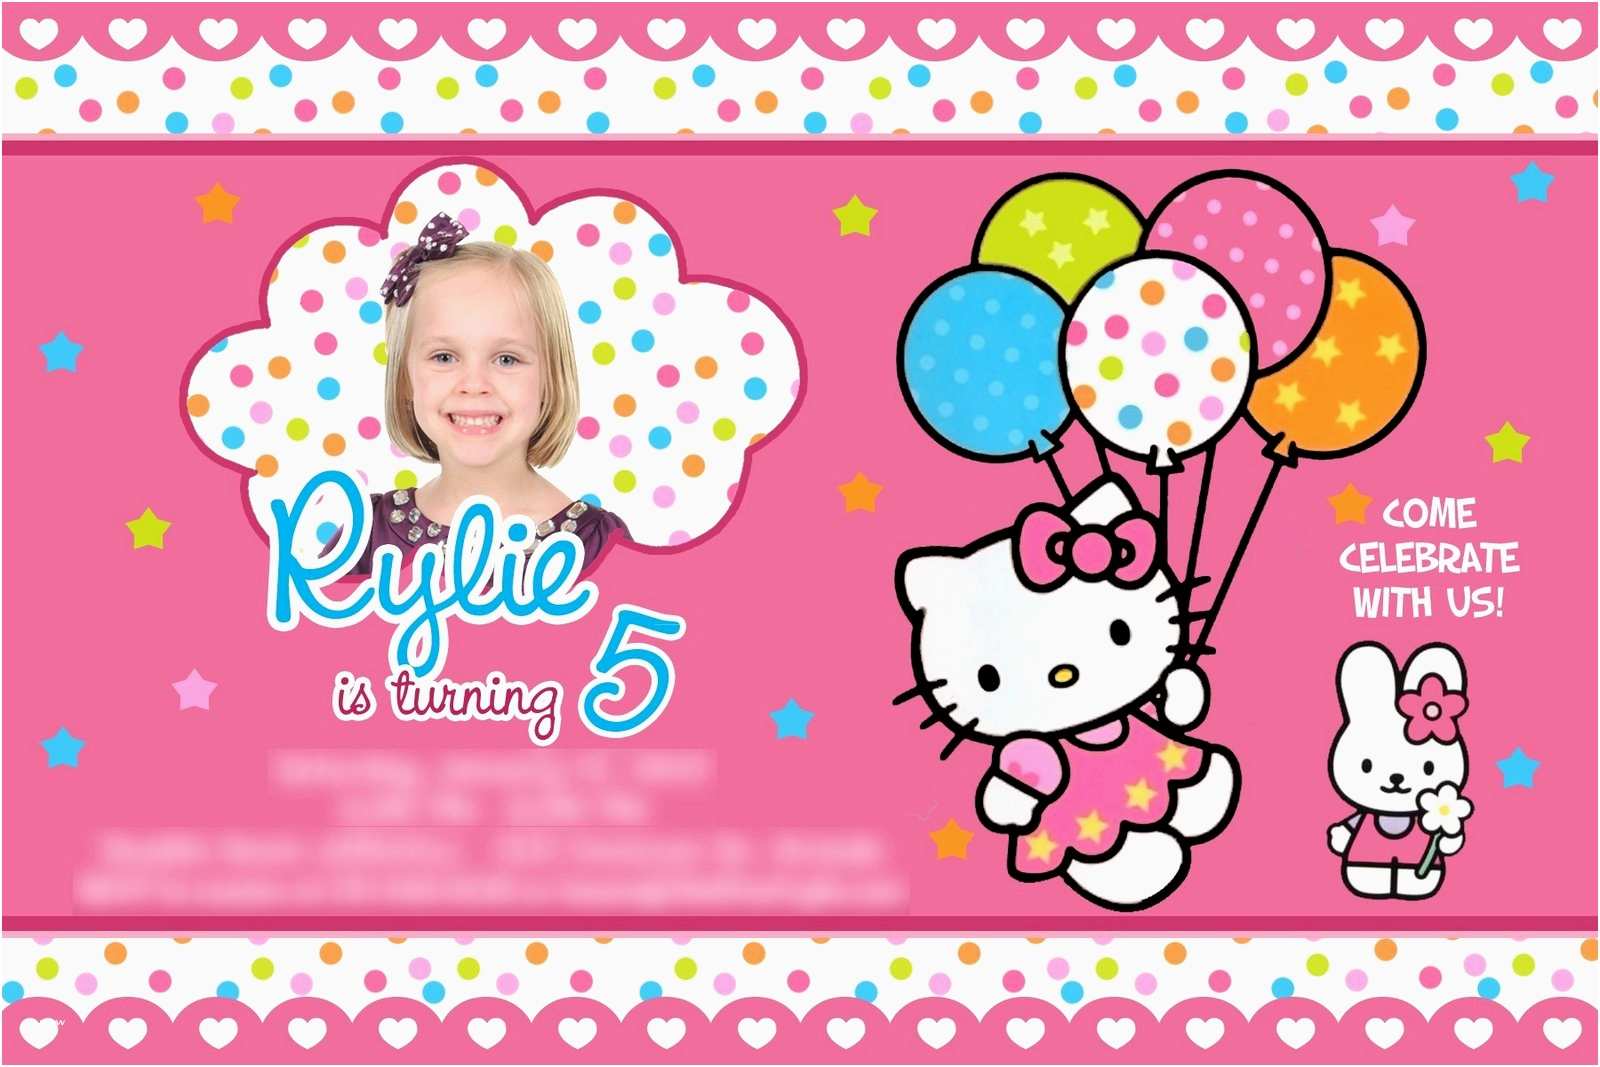 Download Free 100 + hello kitty birthday background Wallpapers